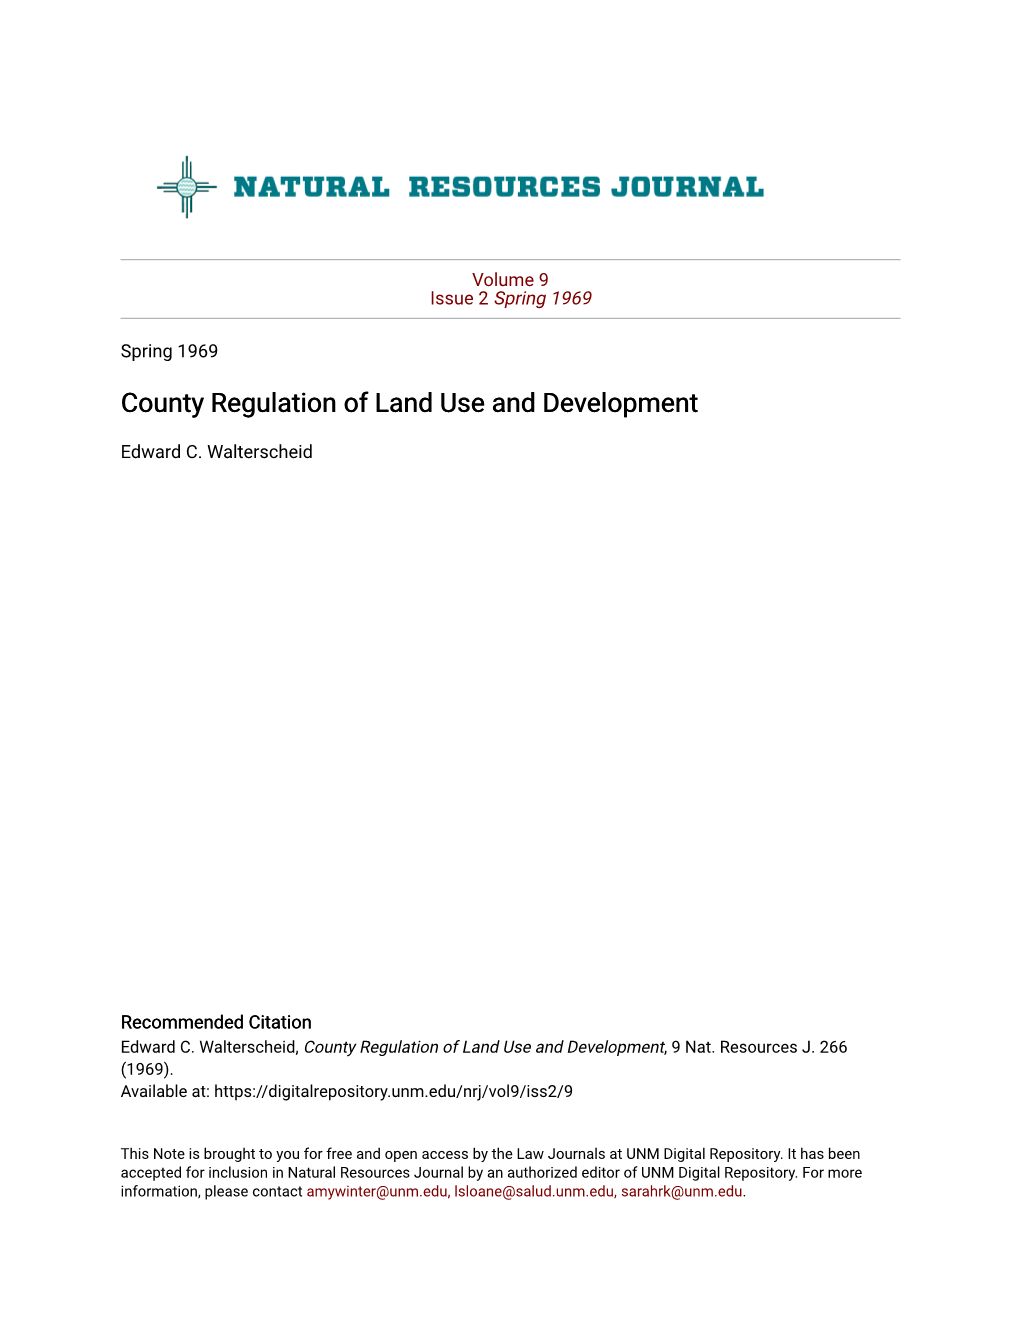 County Regulation of Land Use and Development